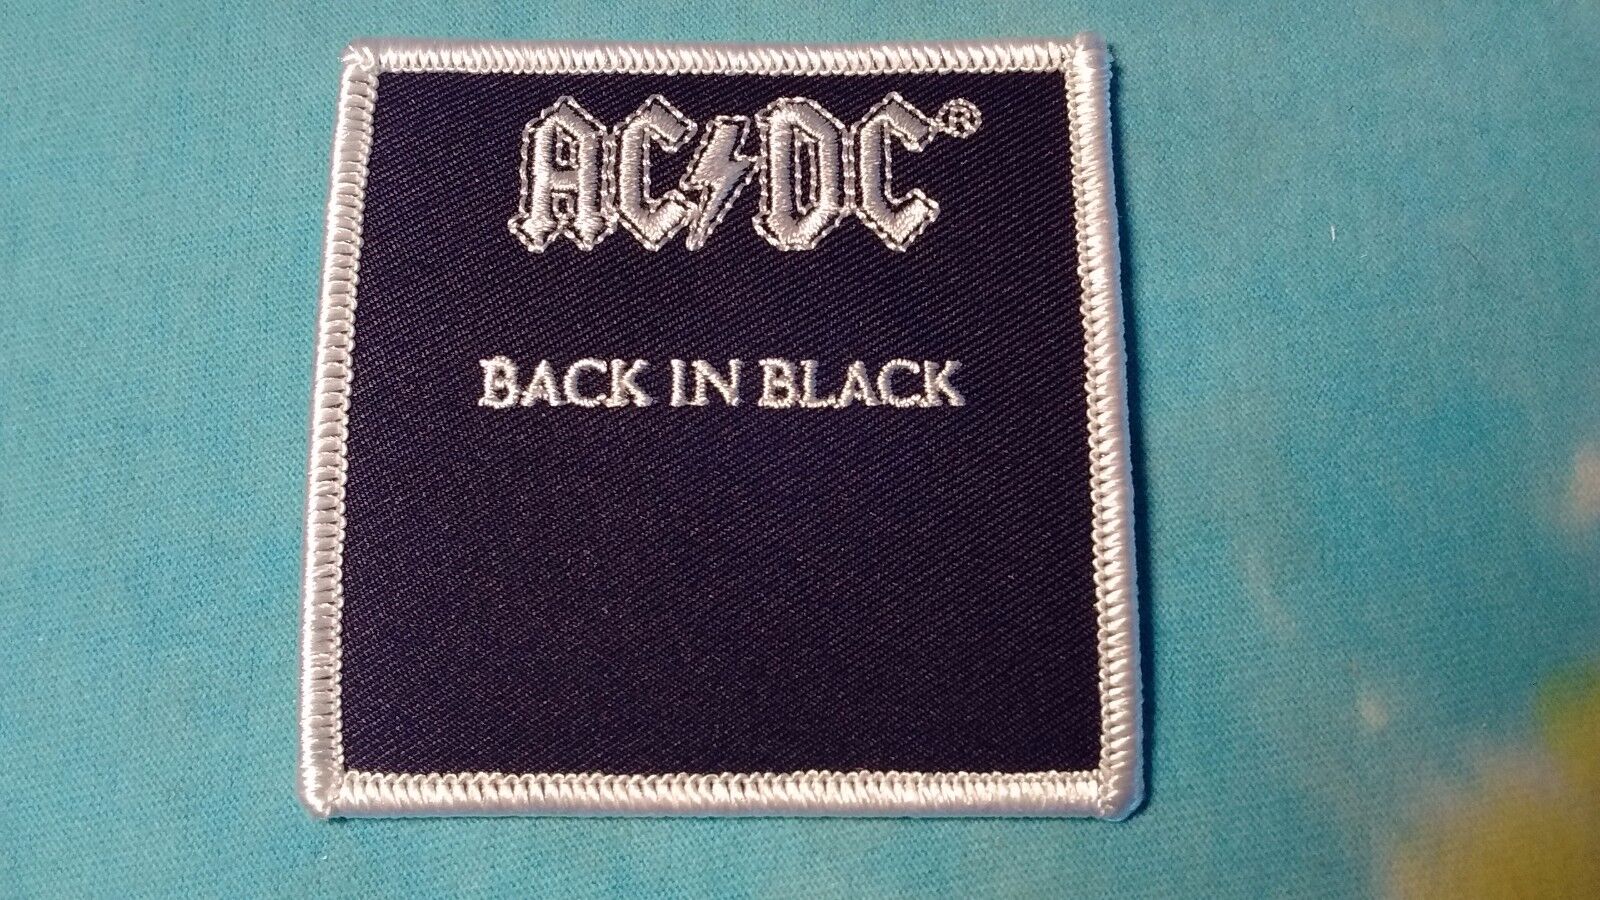 Ac/dc Back In Black 3 Inch Iron On Patch